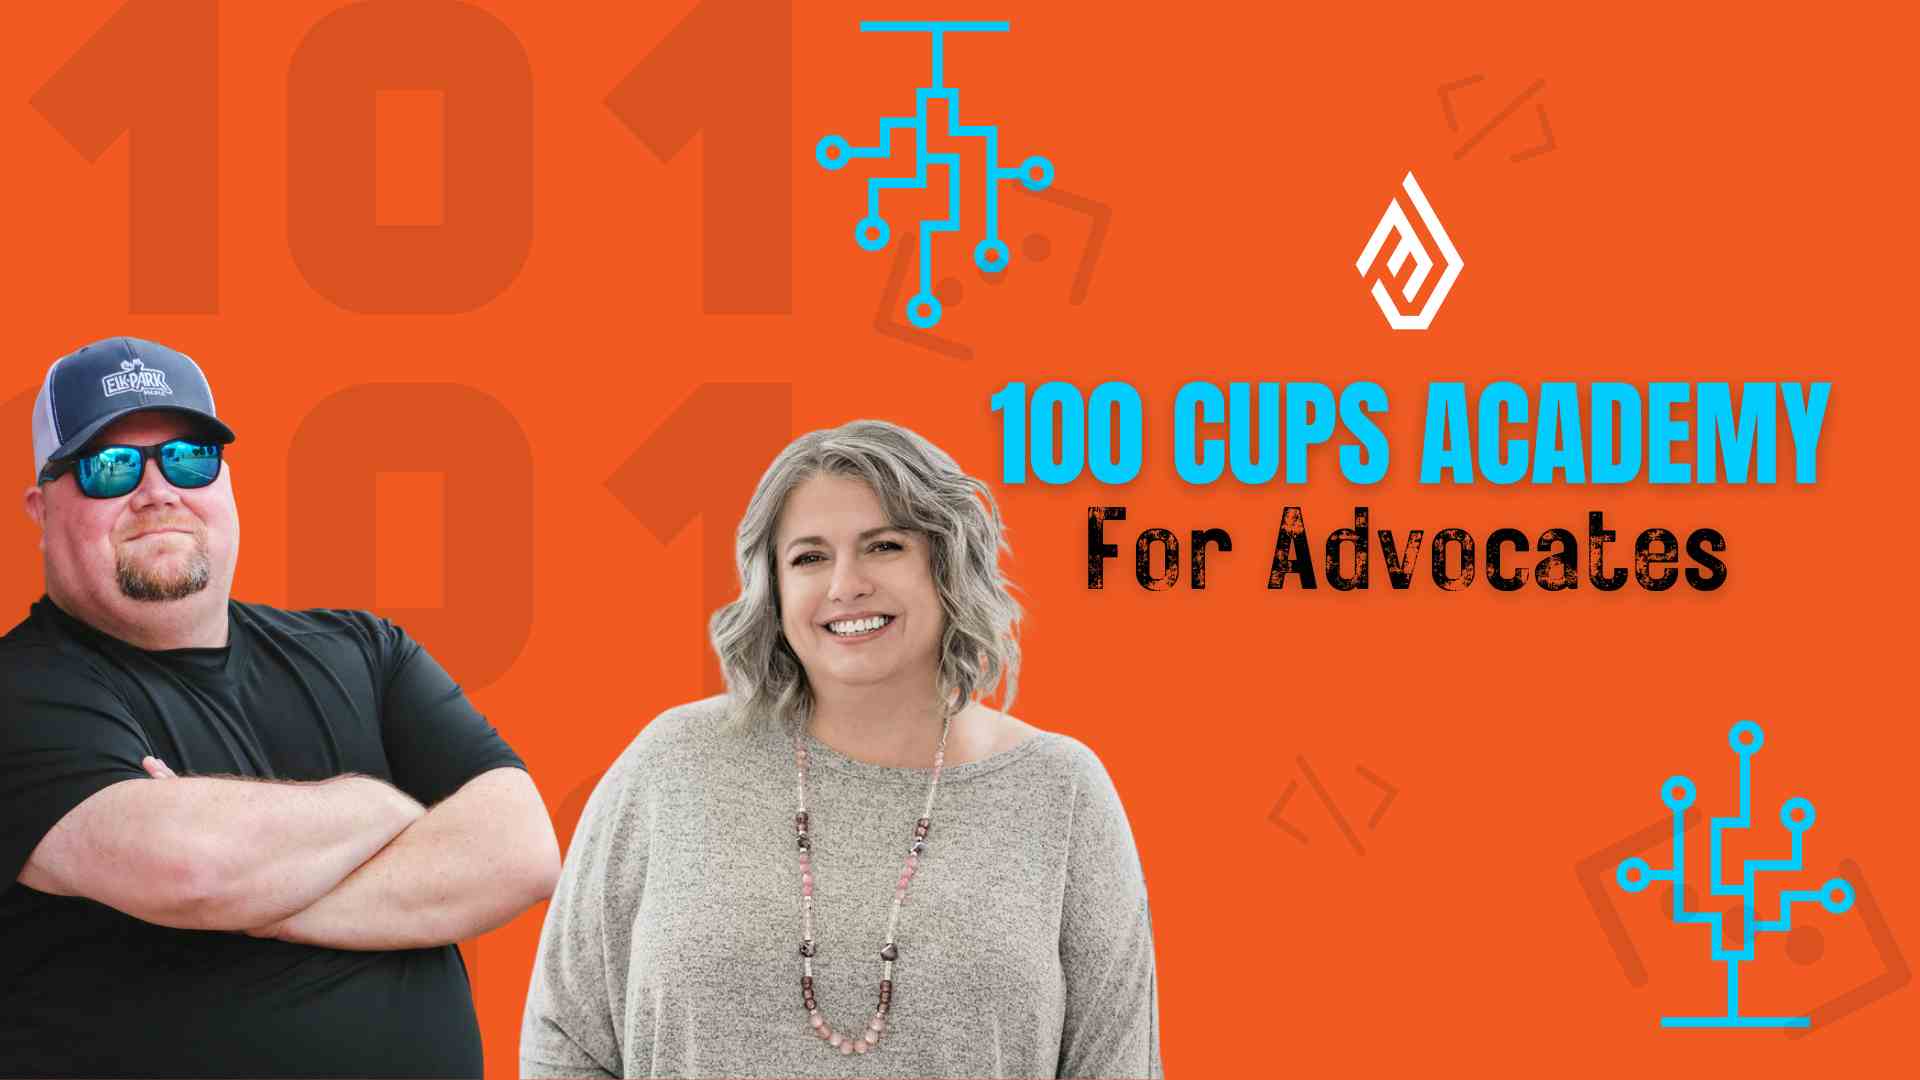 100 Cups Academy For Advocates